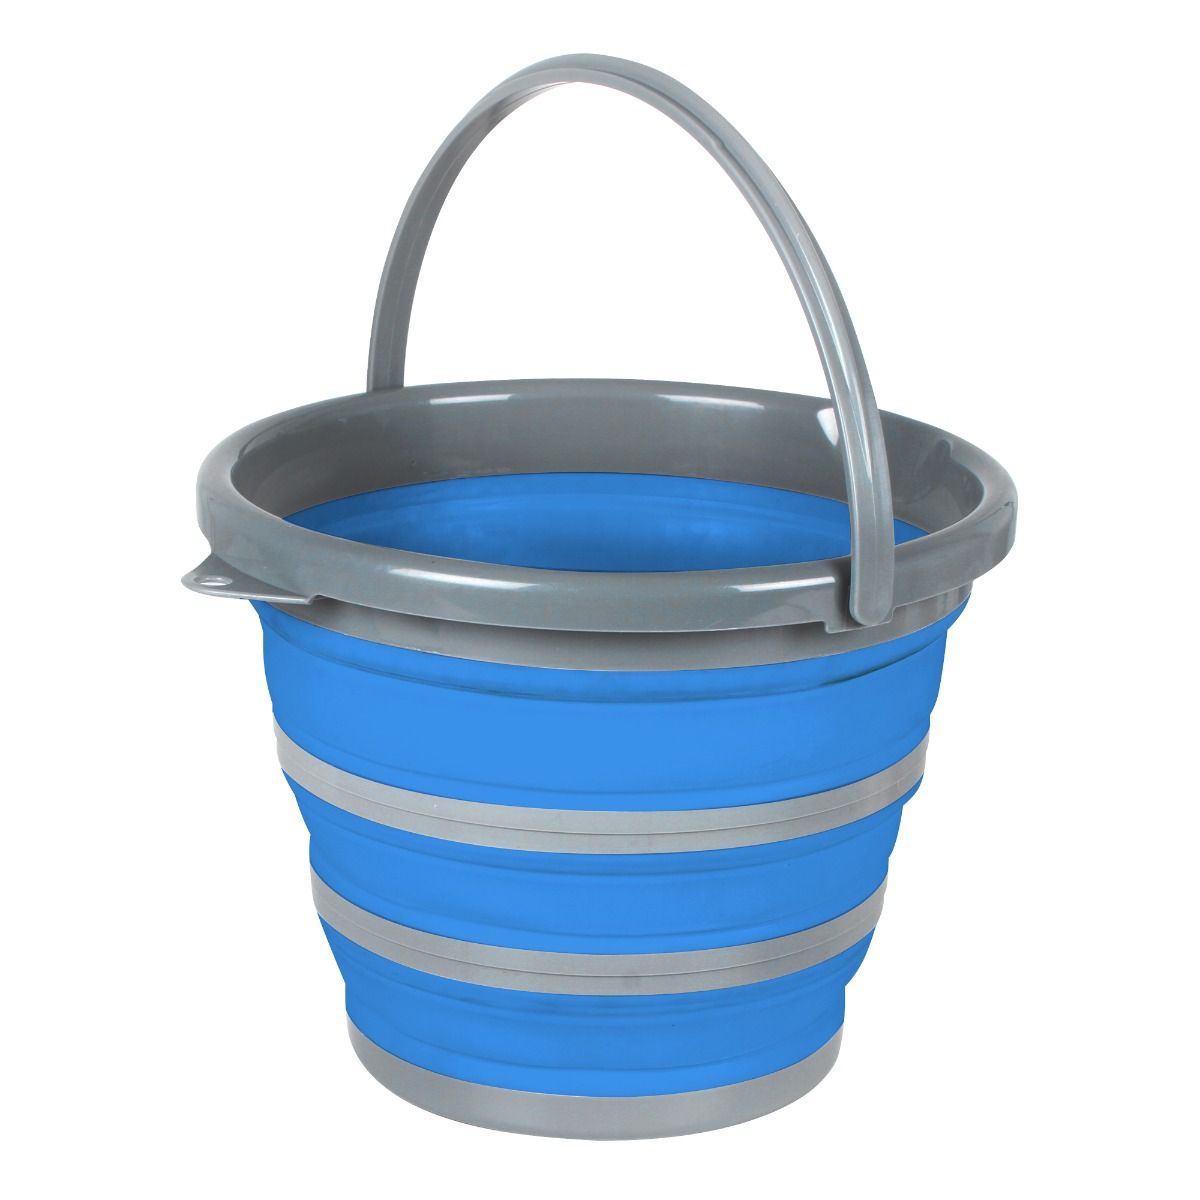 Collapsible 10L Bucket